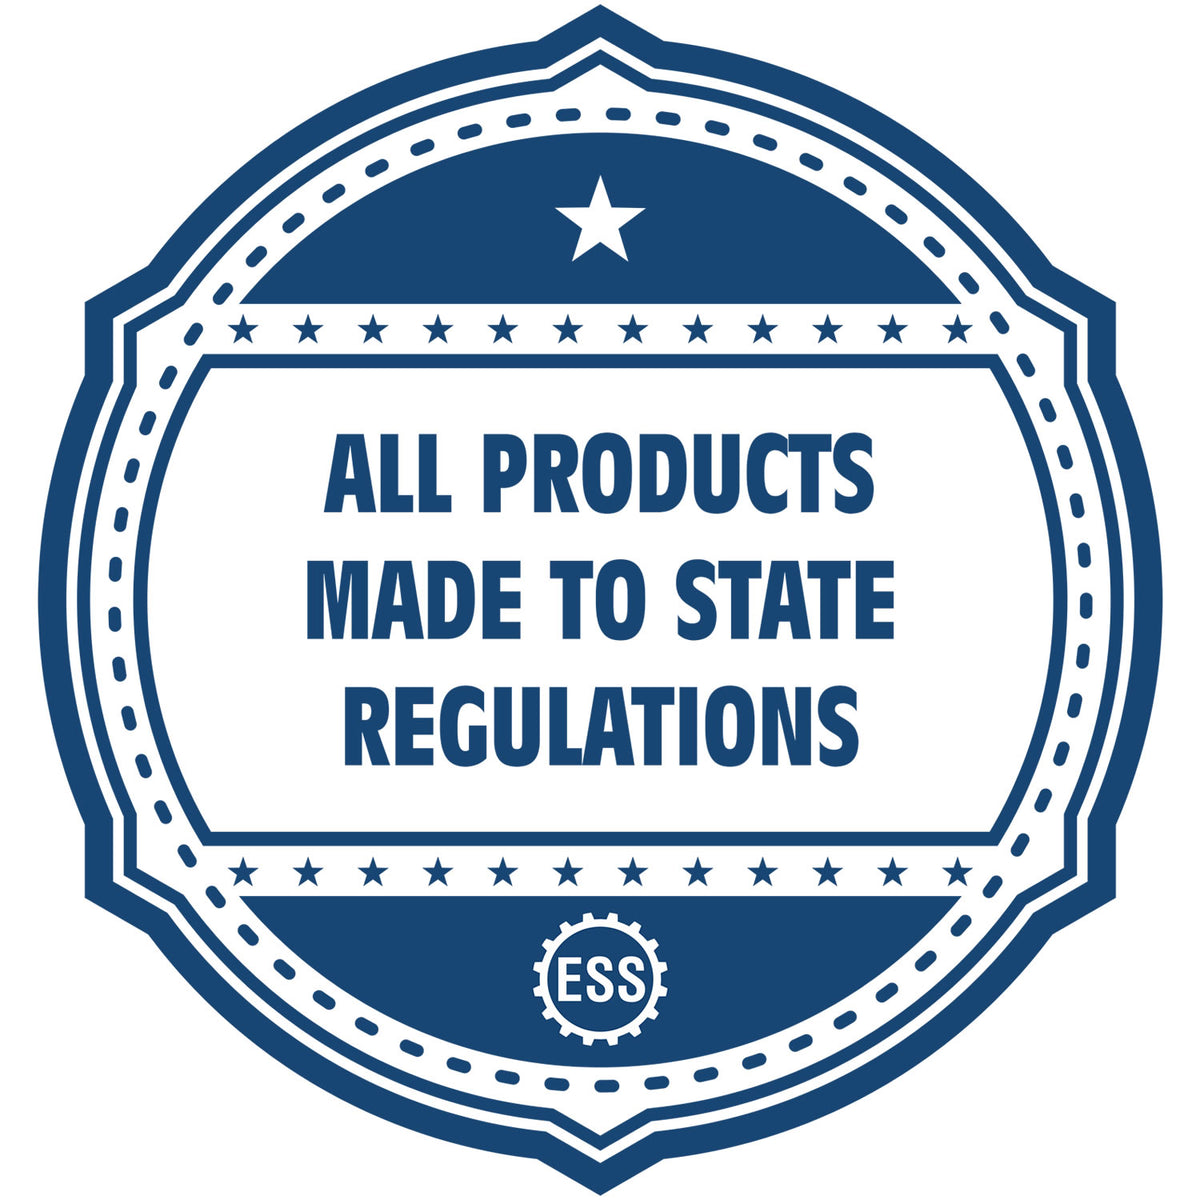 A blue icon or badge for the Gift Massachusetts Engineer Seal showing that this product is made in compliance with state regulations.